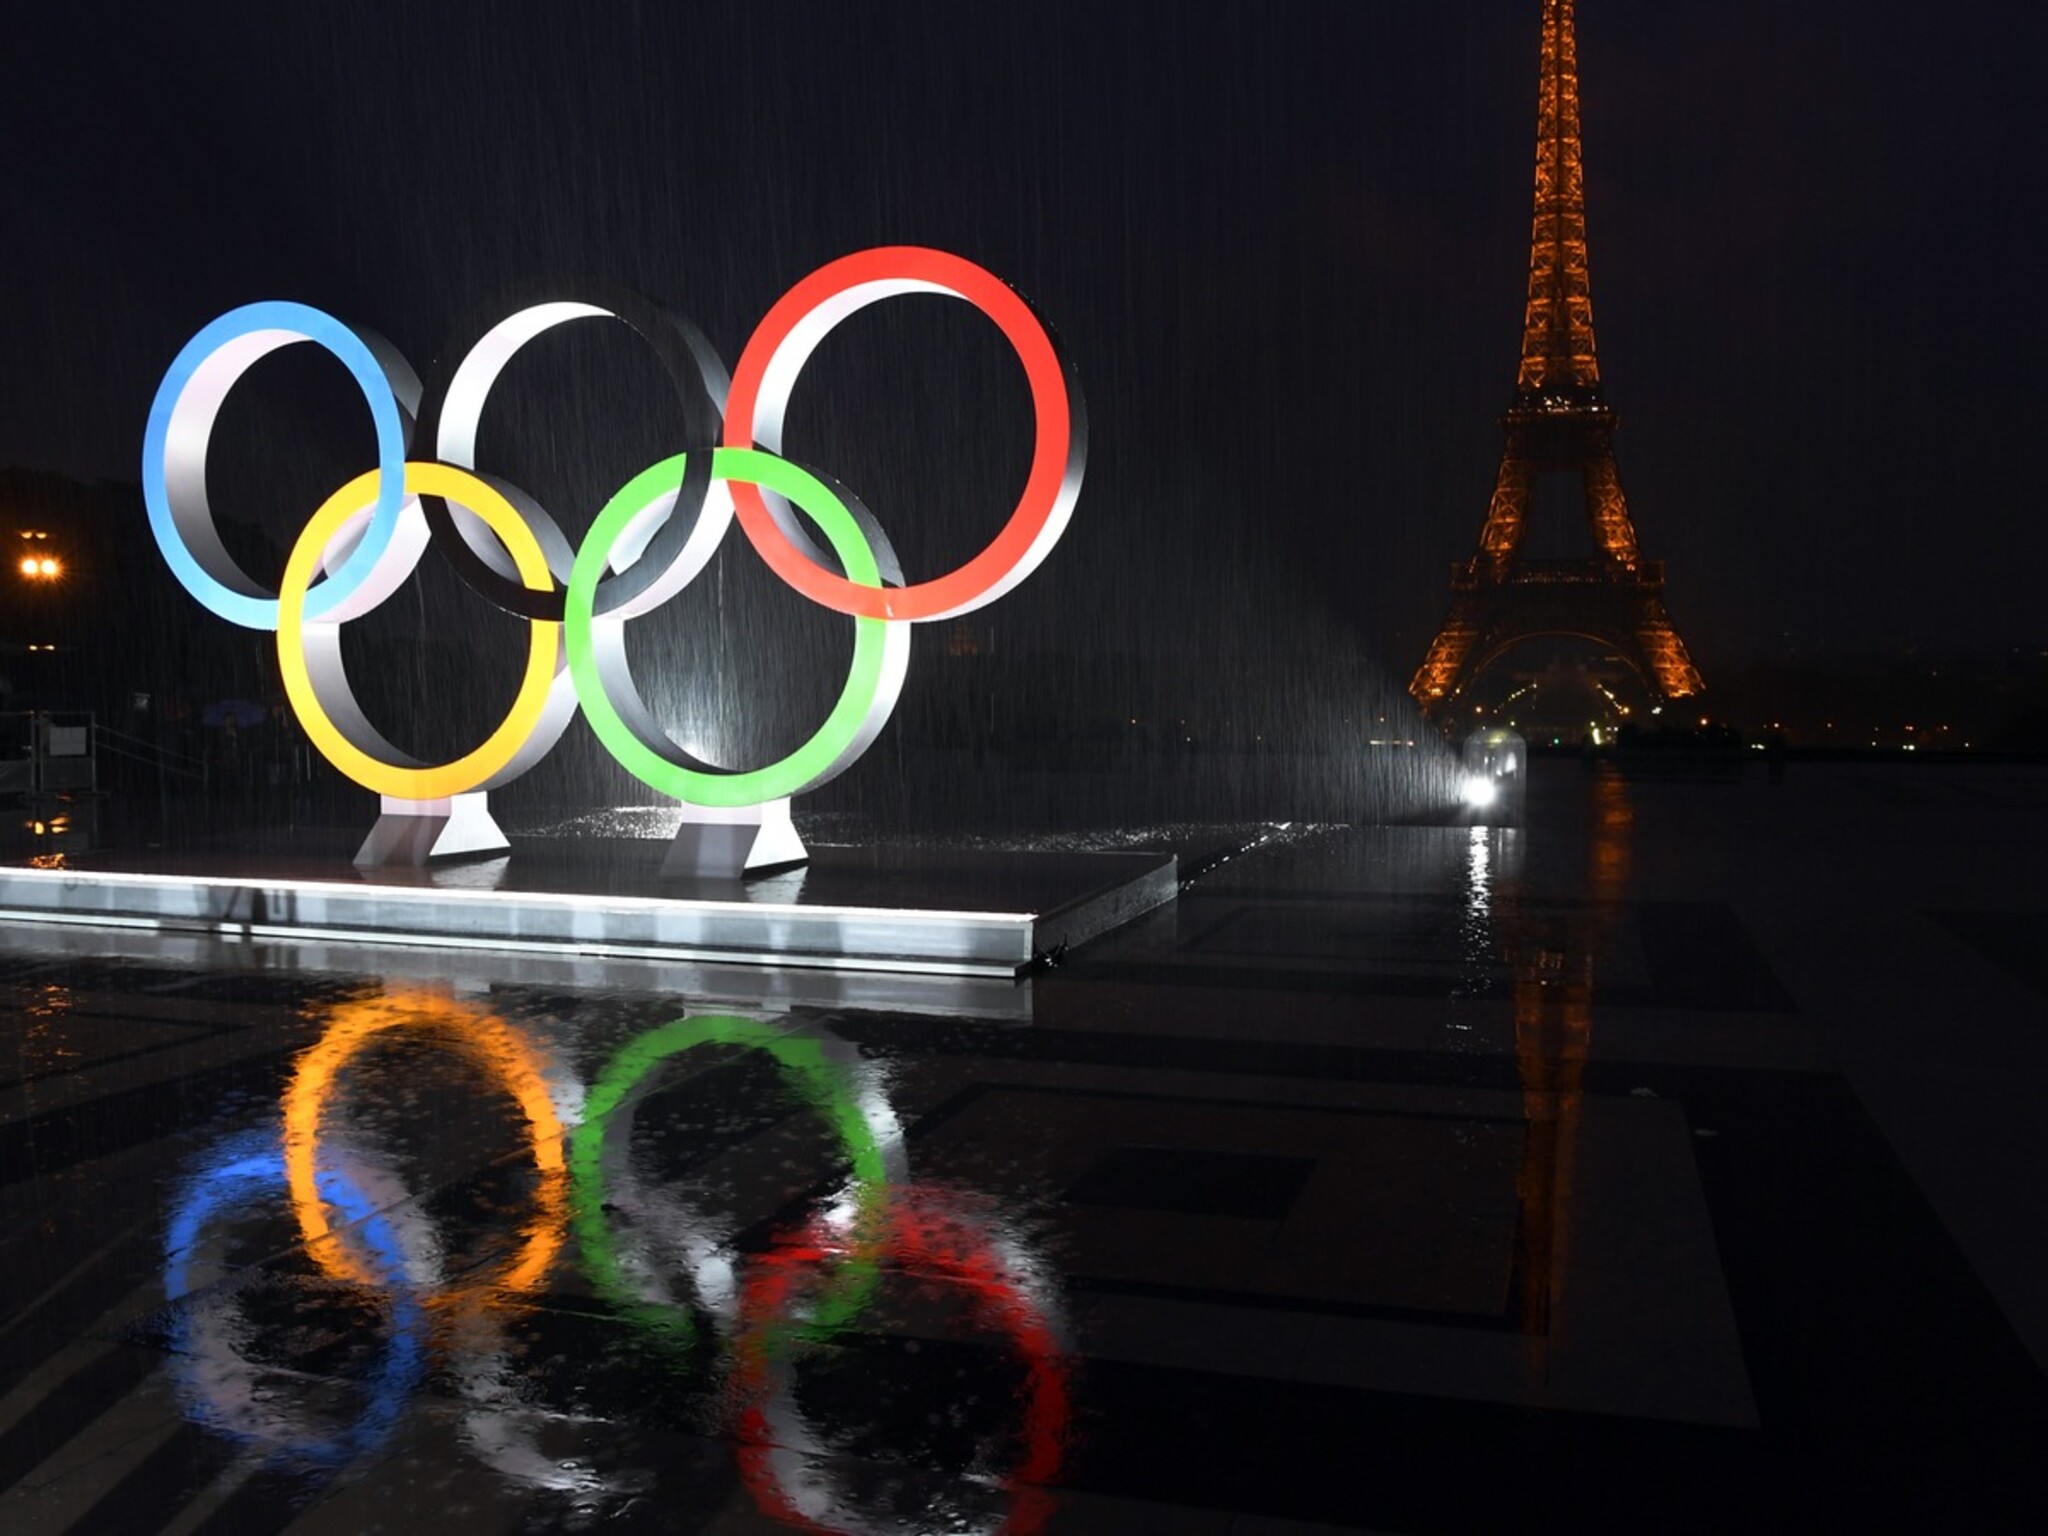 Documents required to attend the 2024 Paris Olympics